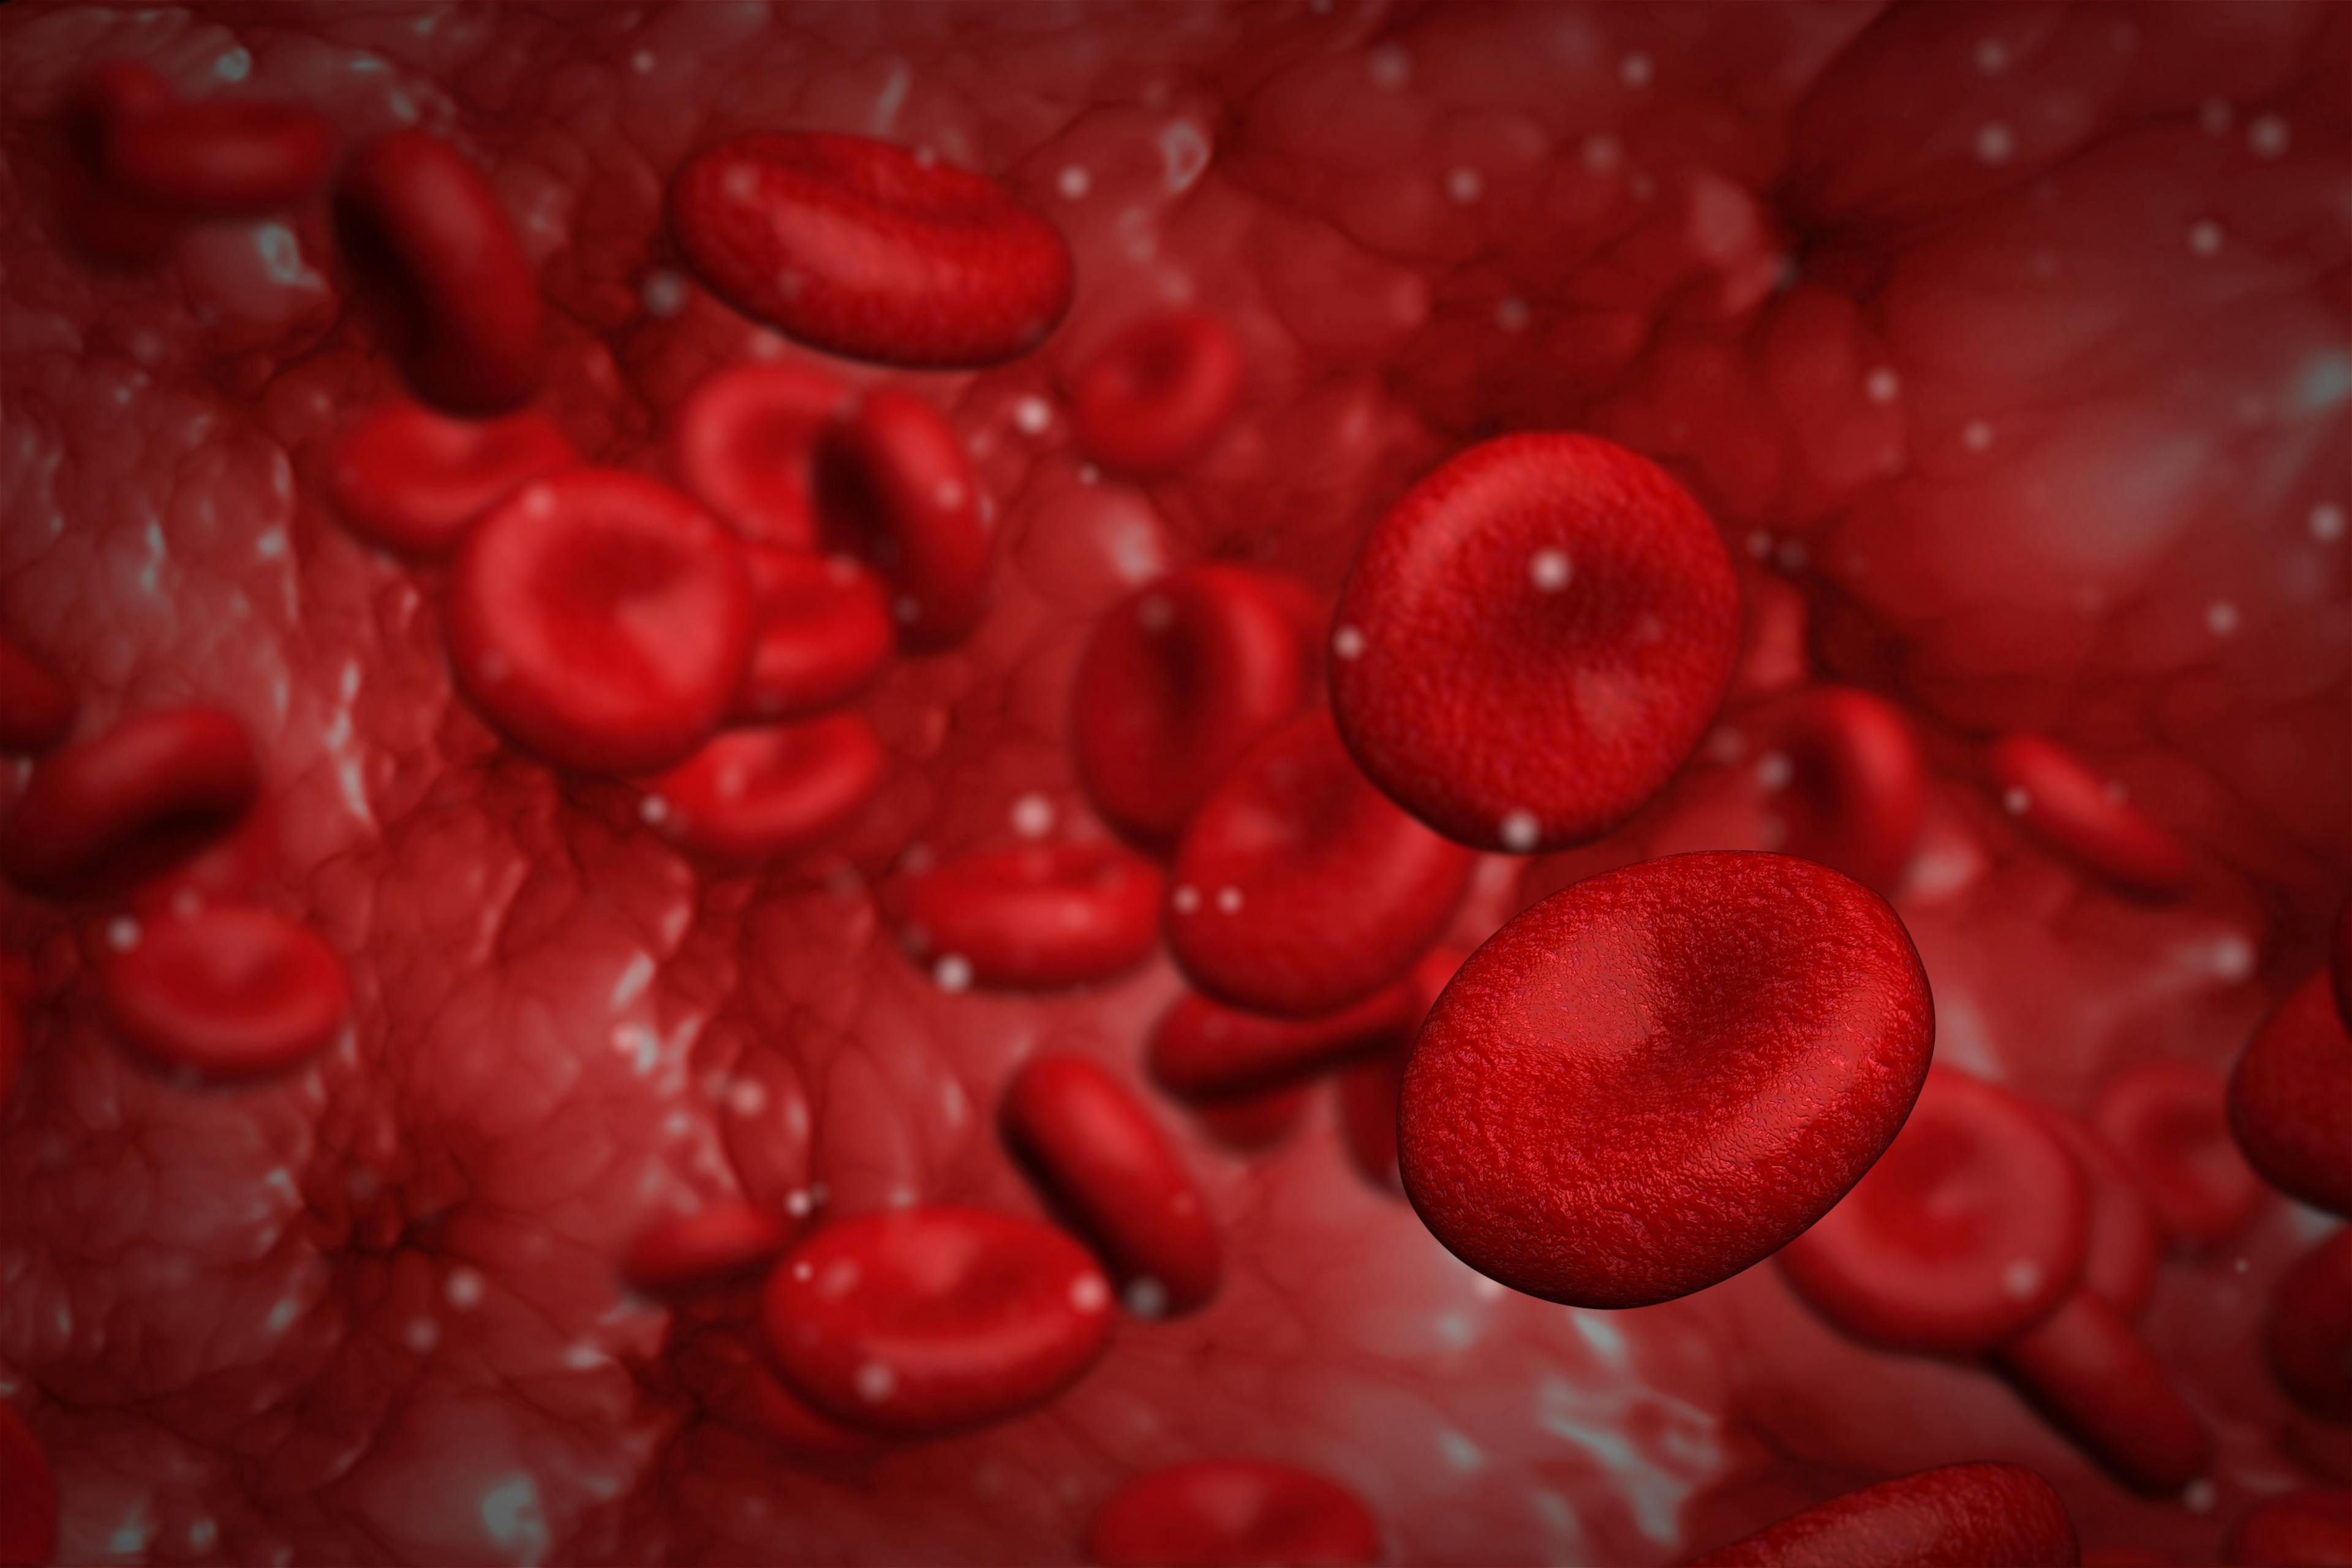 Genentech Releases Positive Data from Broad Blood Cancer Portfolio